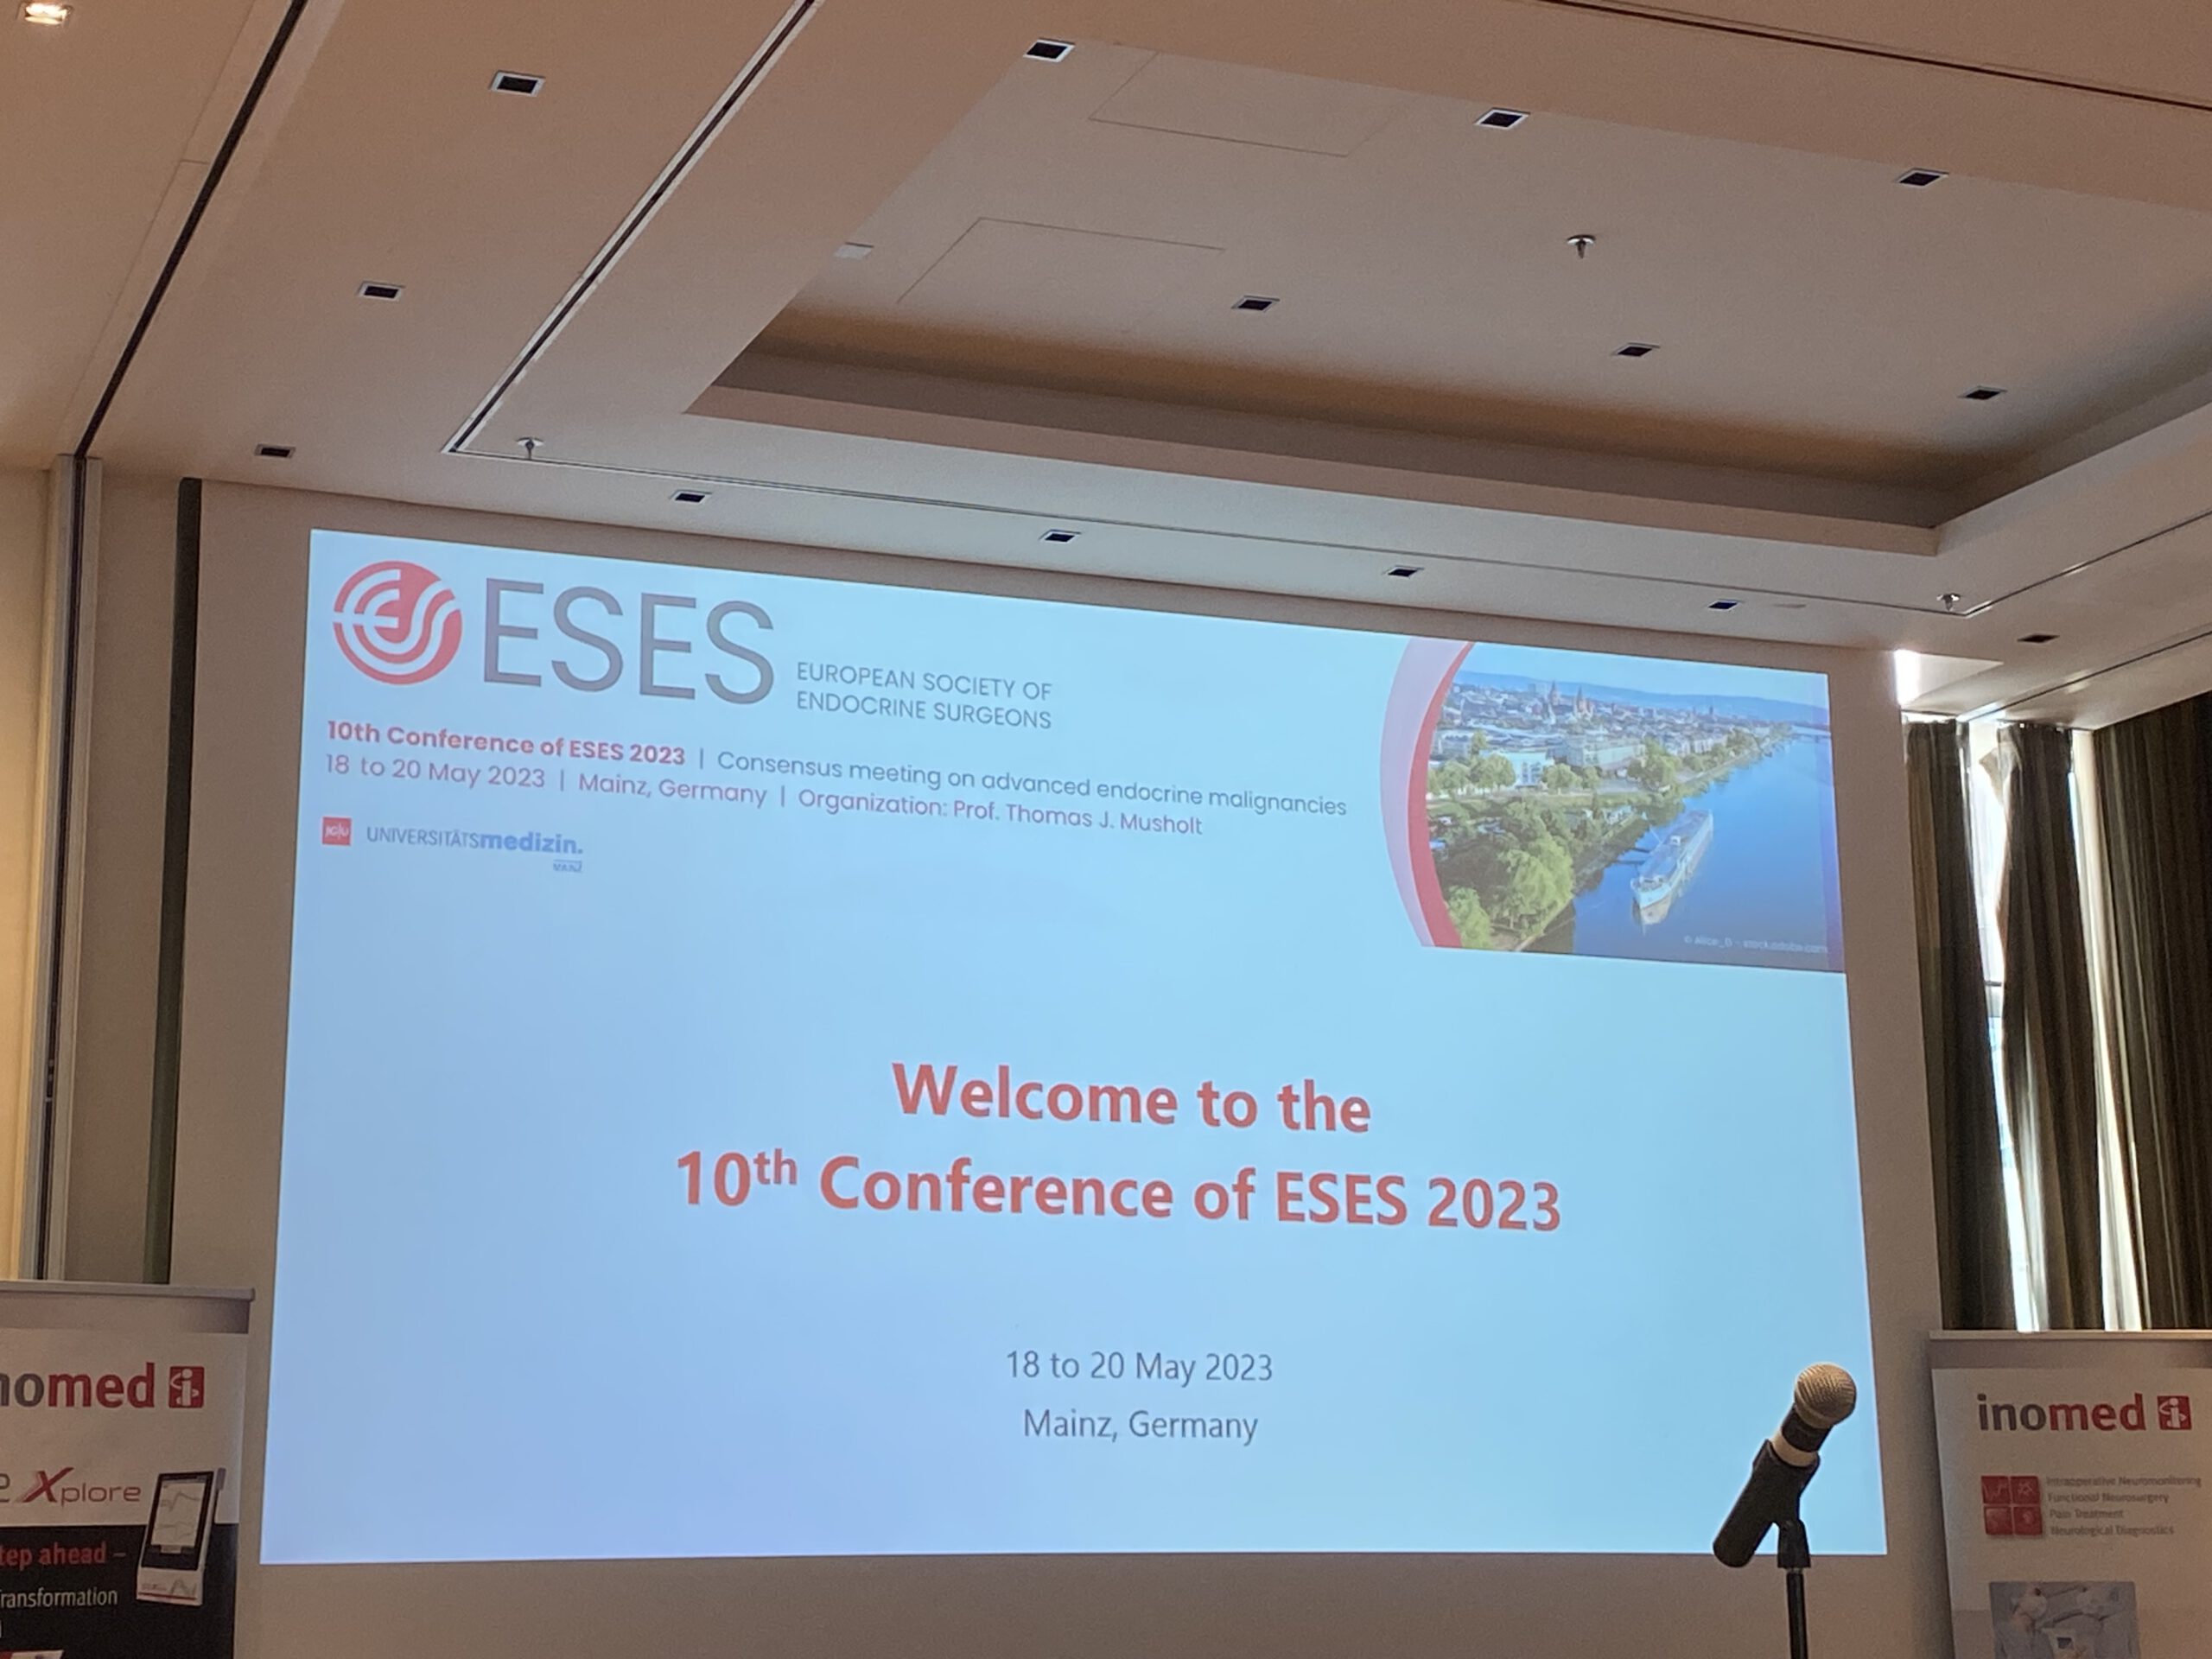 10th Conference of ESES 2023